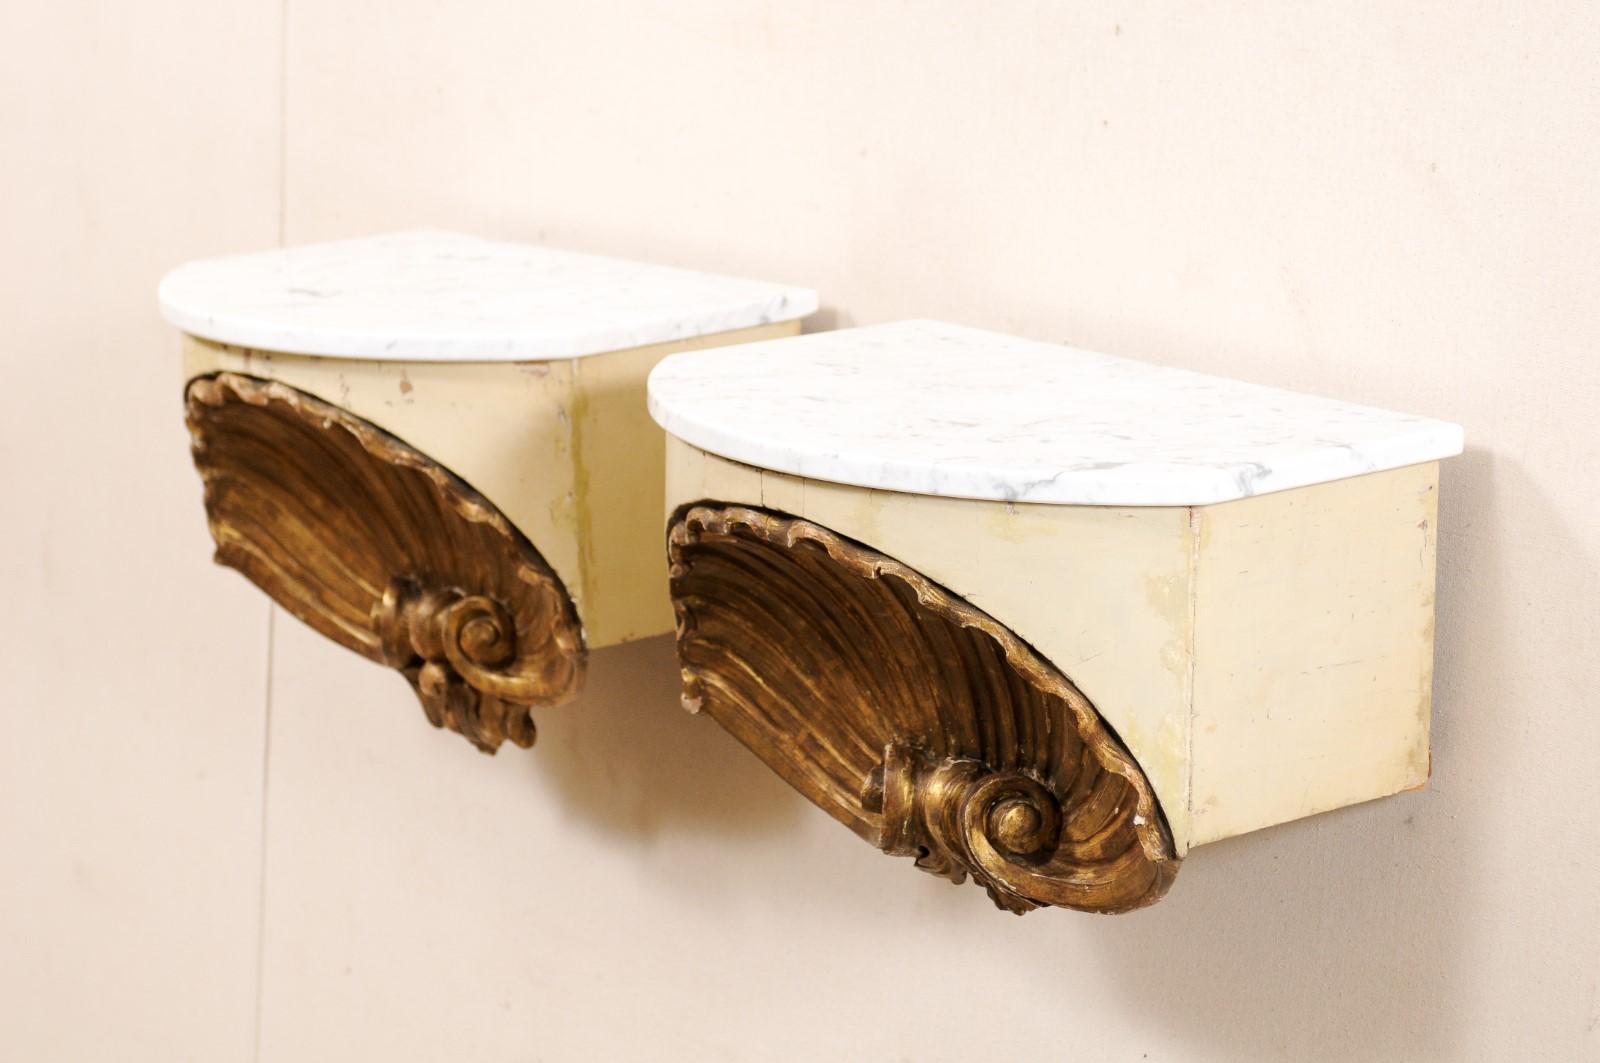 Pair of Early 19th Century Italian Shell Wall-Shelves with Marble Tops For Sale 5